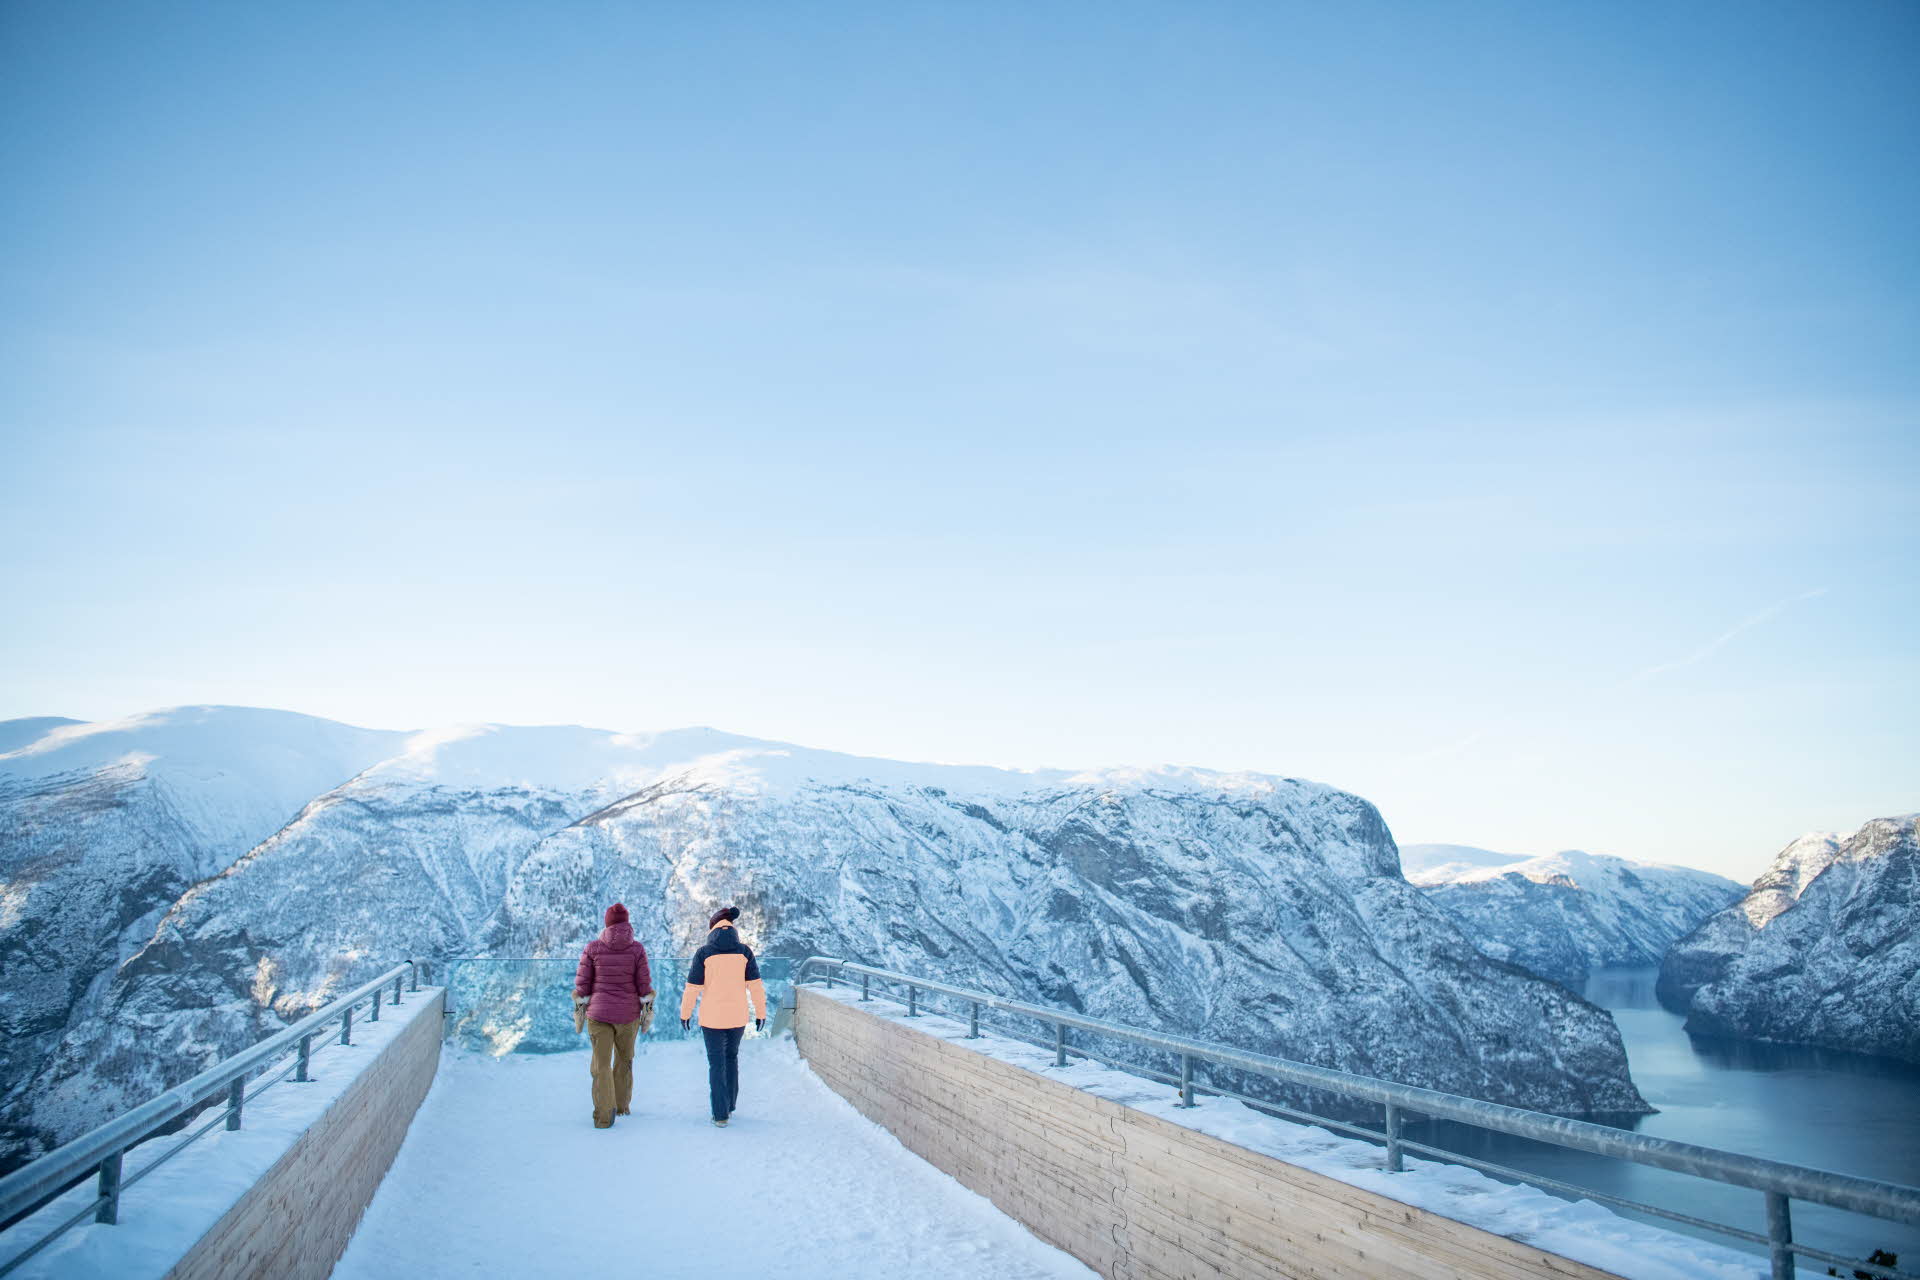 Two people in winter outfit walking on snow on Stegastein Viewpoint surrounded by winter landscape. Photo. 